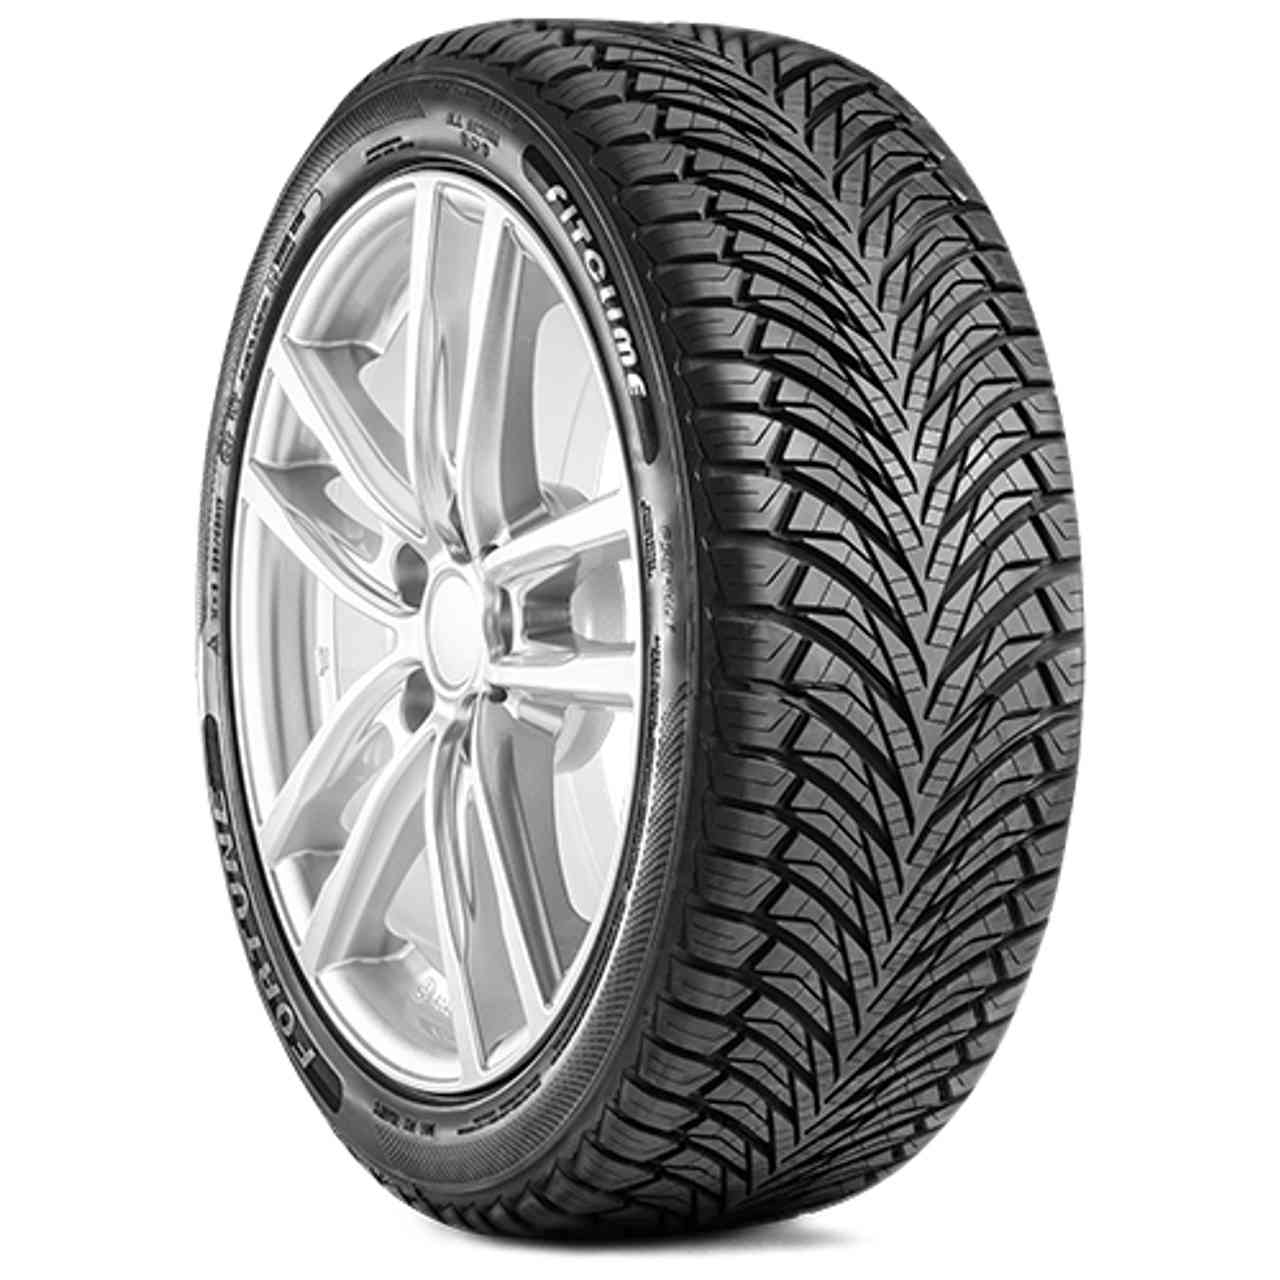 FORTUNE FITCLIME FSR-401 175/65R15 88H BSW XL